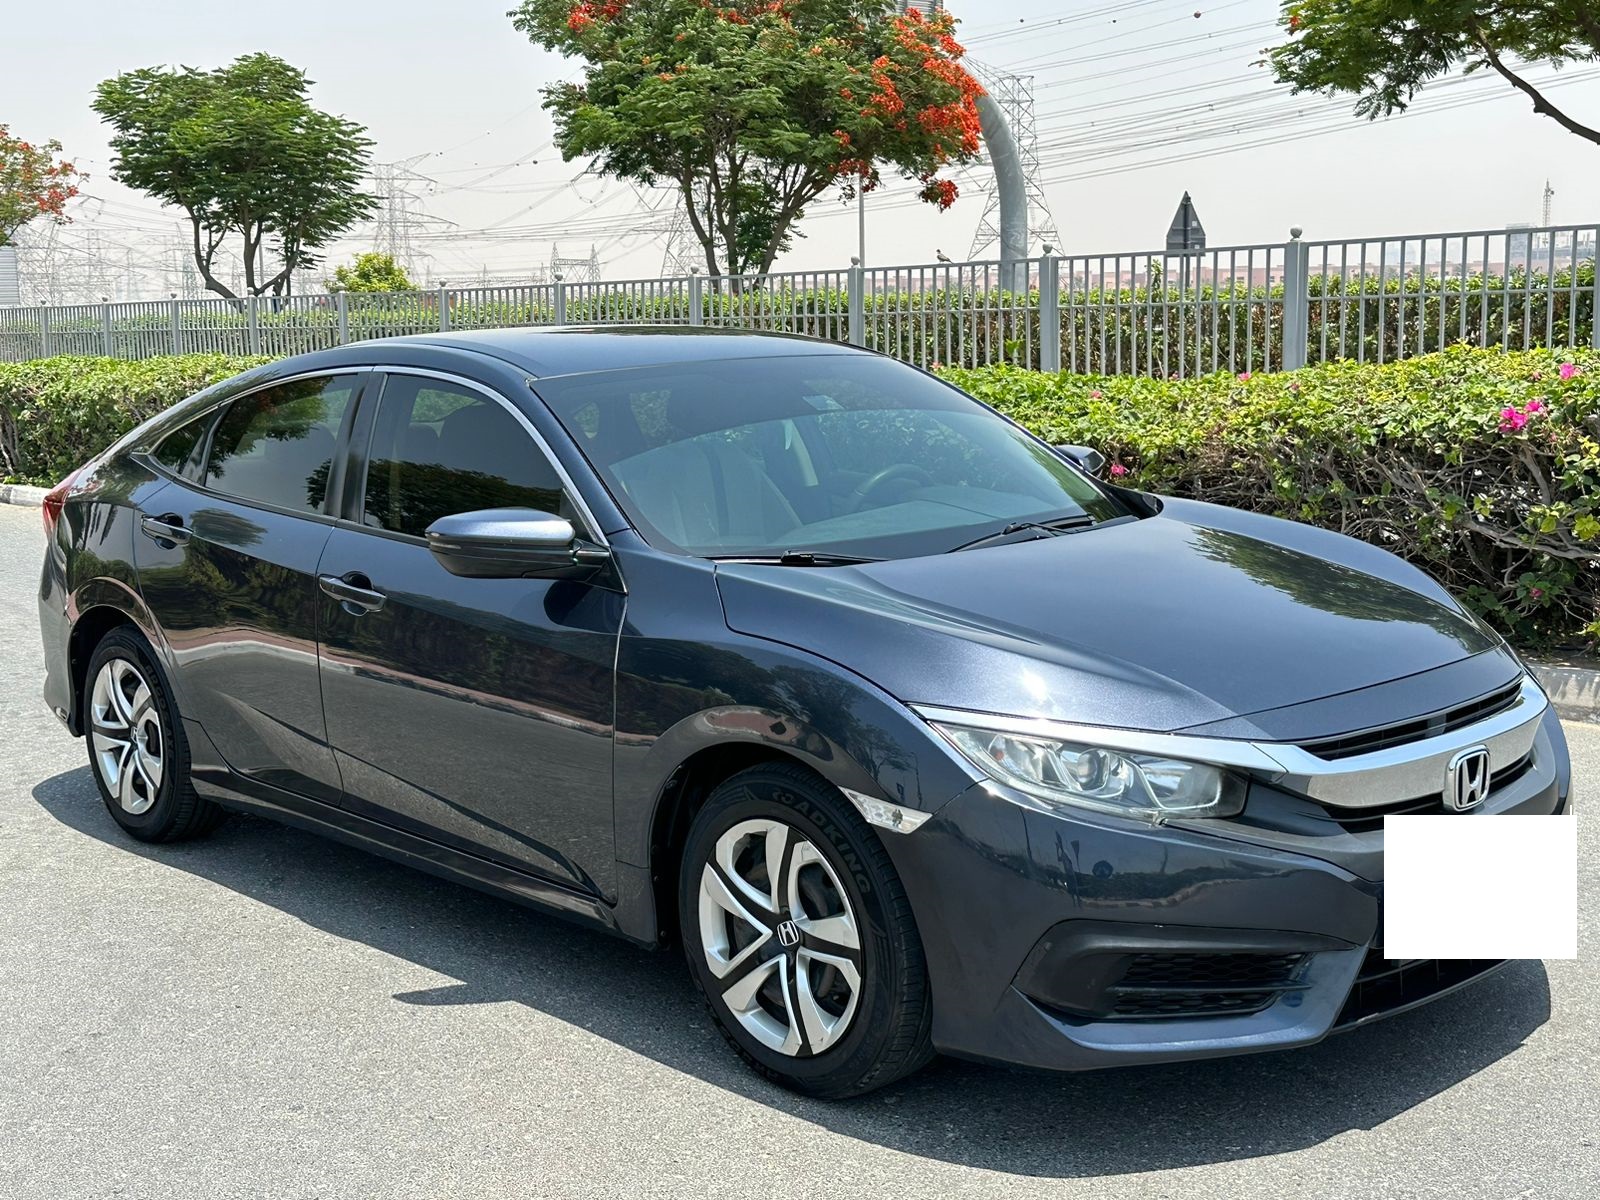 New Year Offer 680/-Aed Monthly,2016 Civic 2.0L,Cruise Control, (